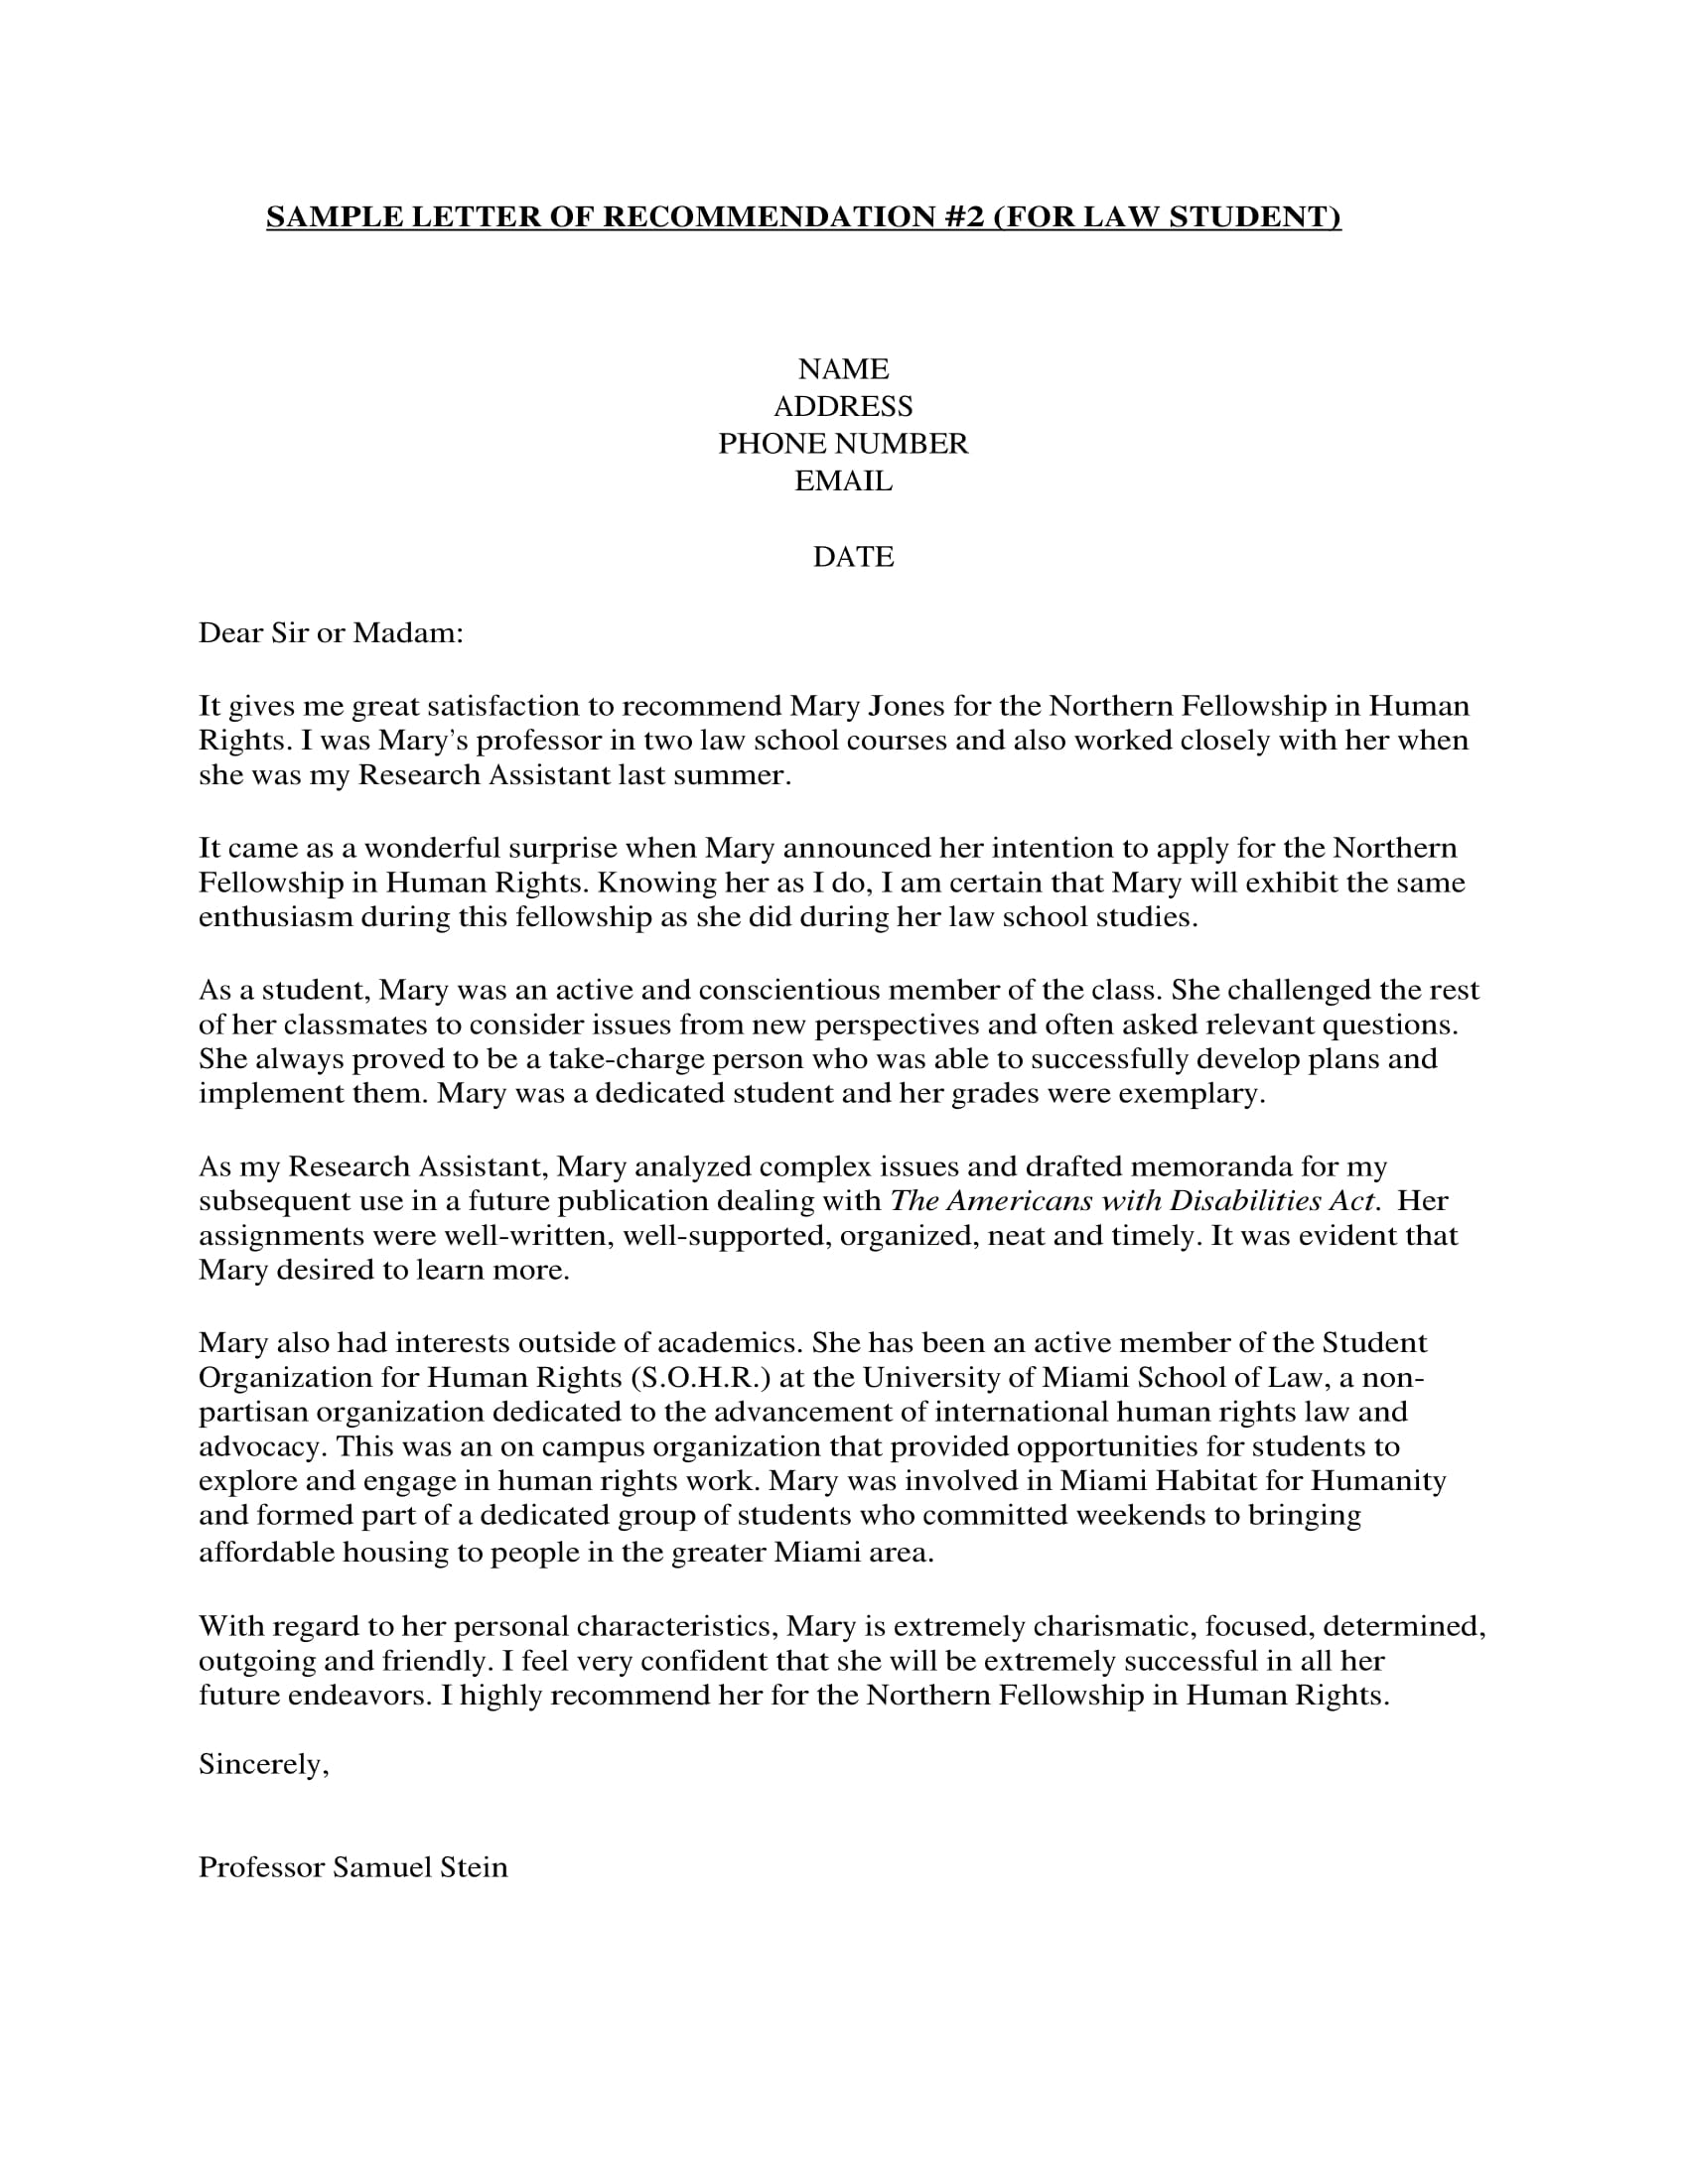 Letter Of Recommendation Template Student from images.examples.com